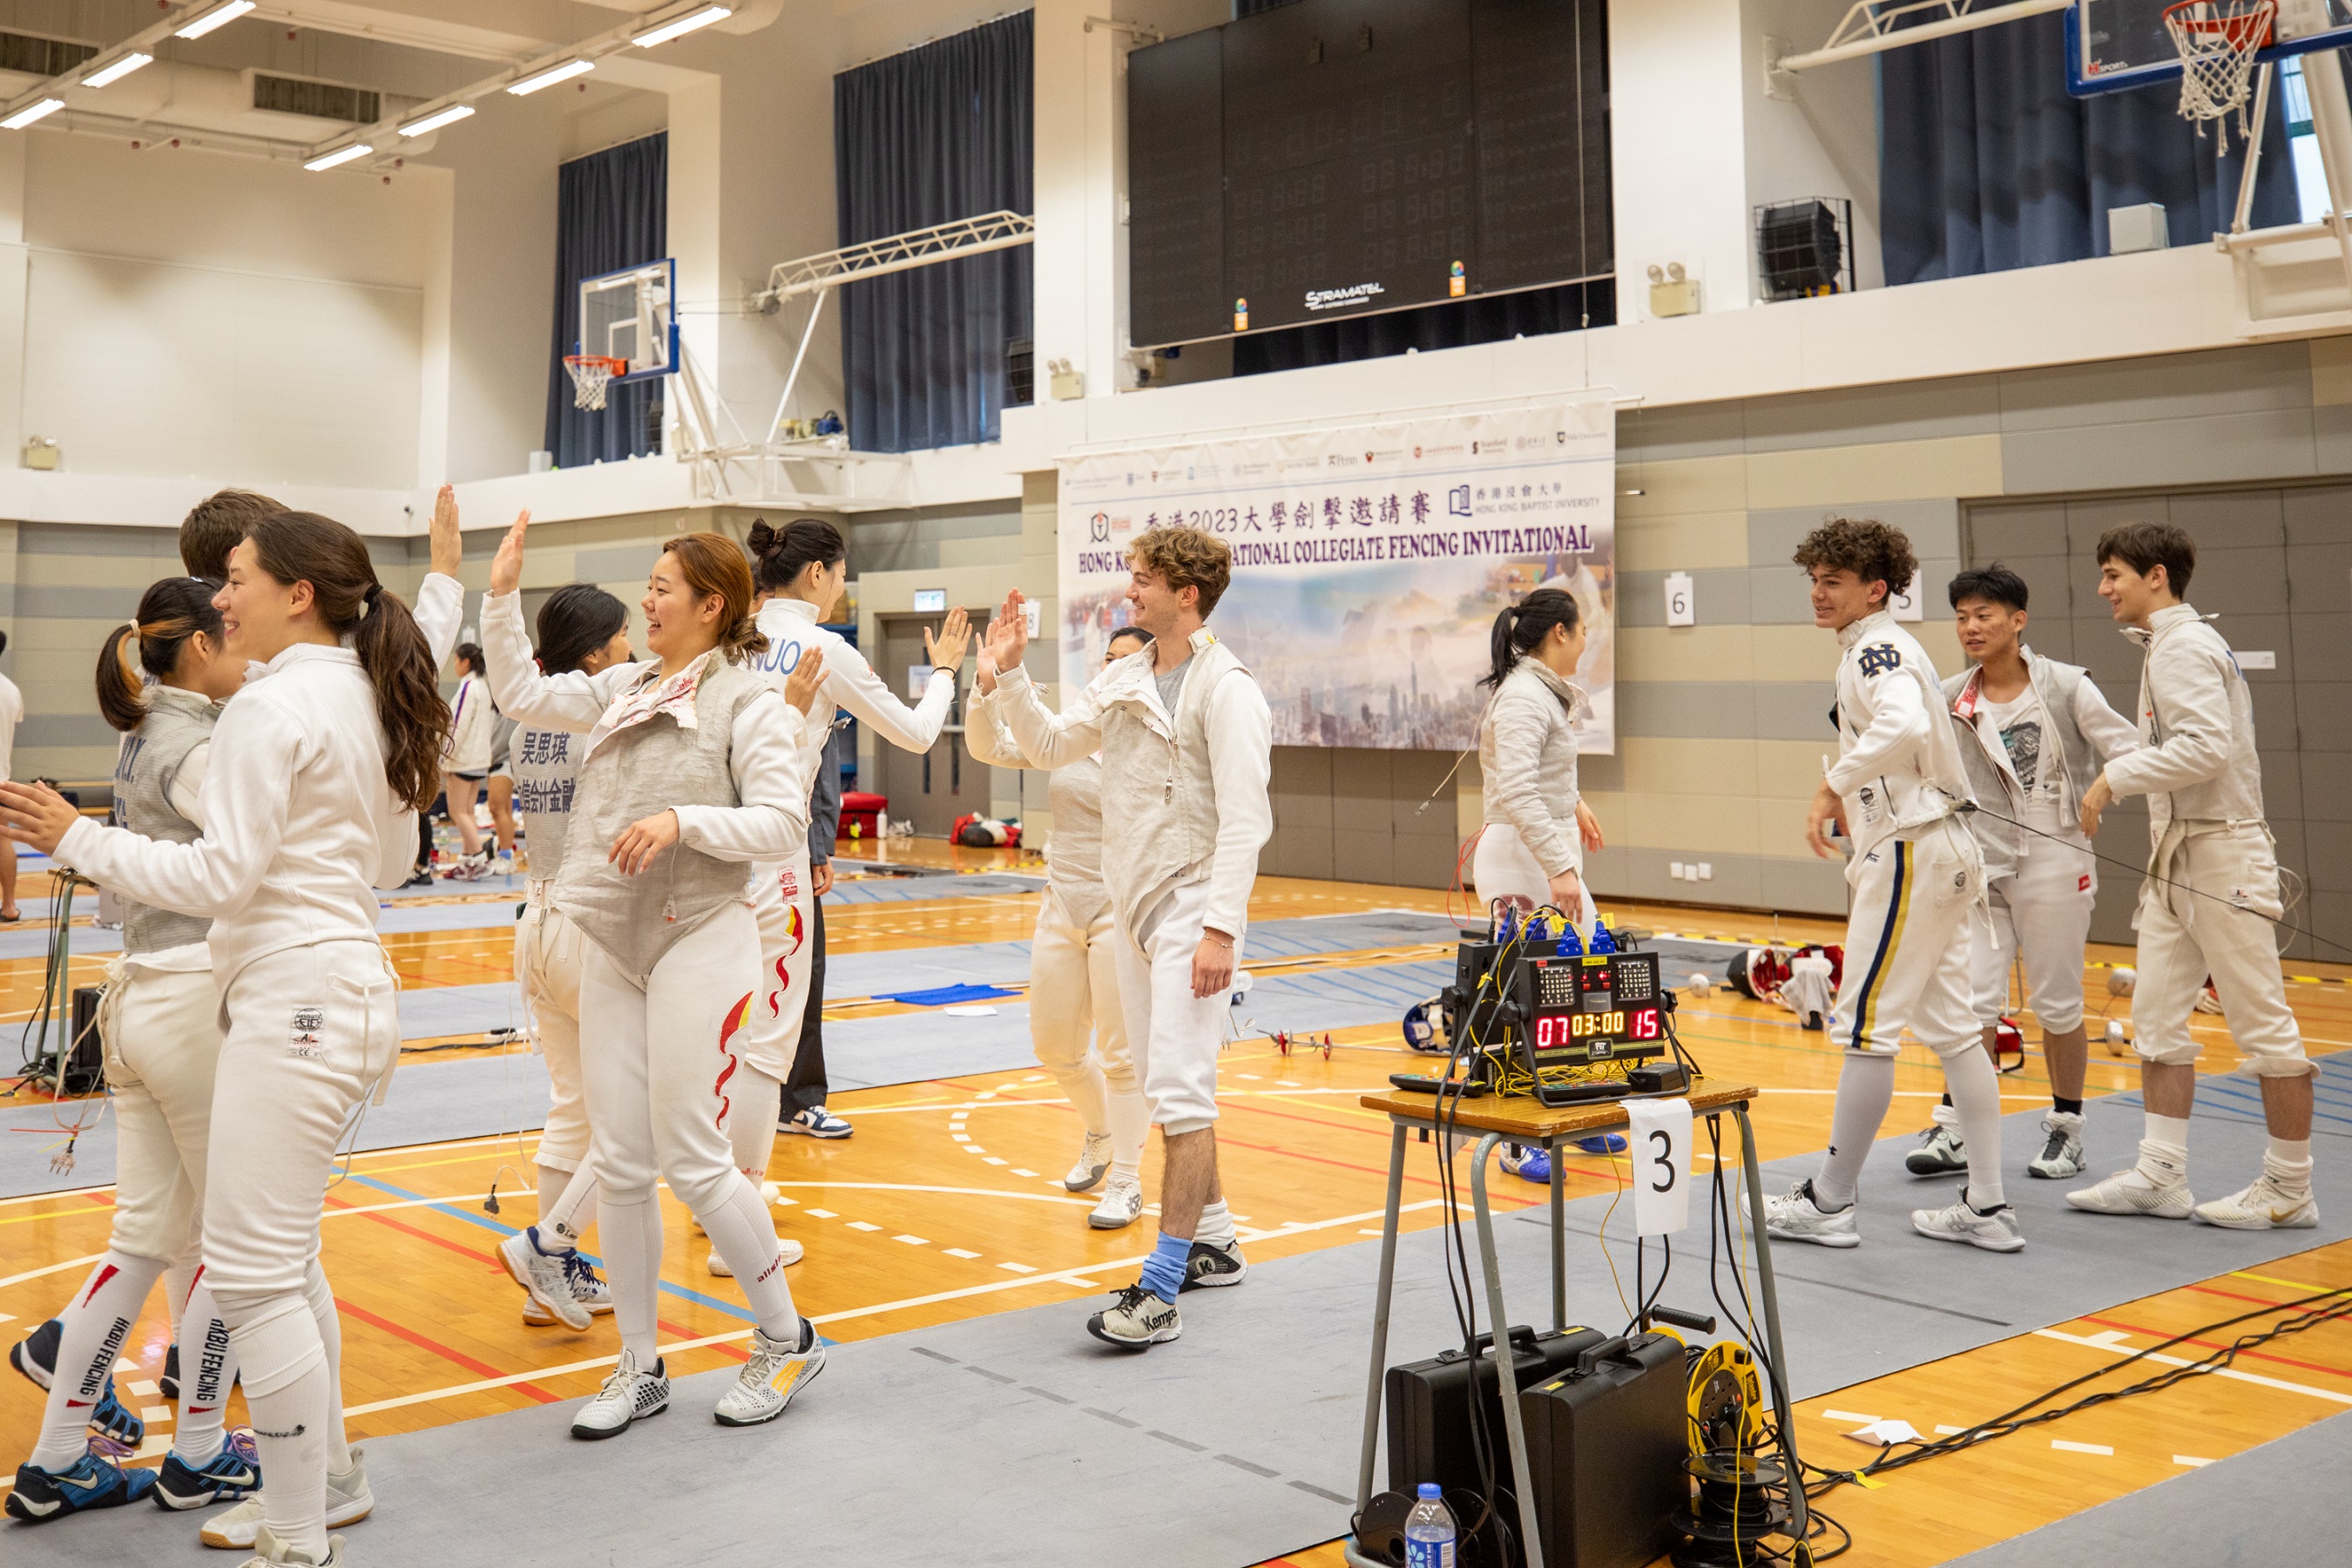 During the two-day tournament, participating fencers compete in men's and women's individual events as well as mixed-team competition in foil, epee and saber at HKBU’s Wai Hang Sports Centre.